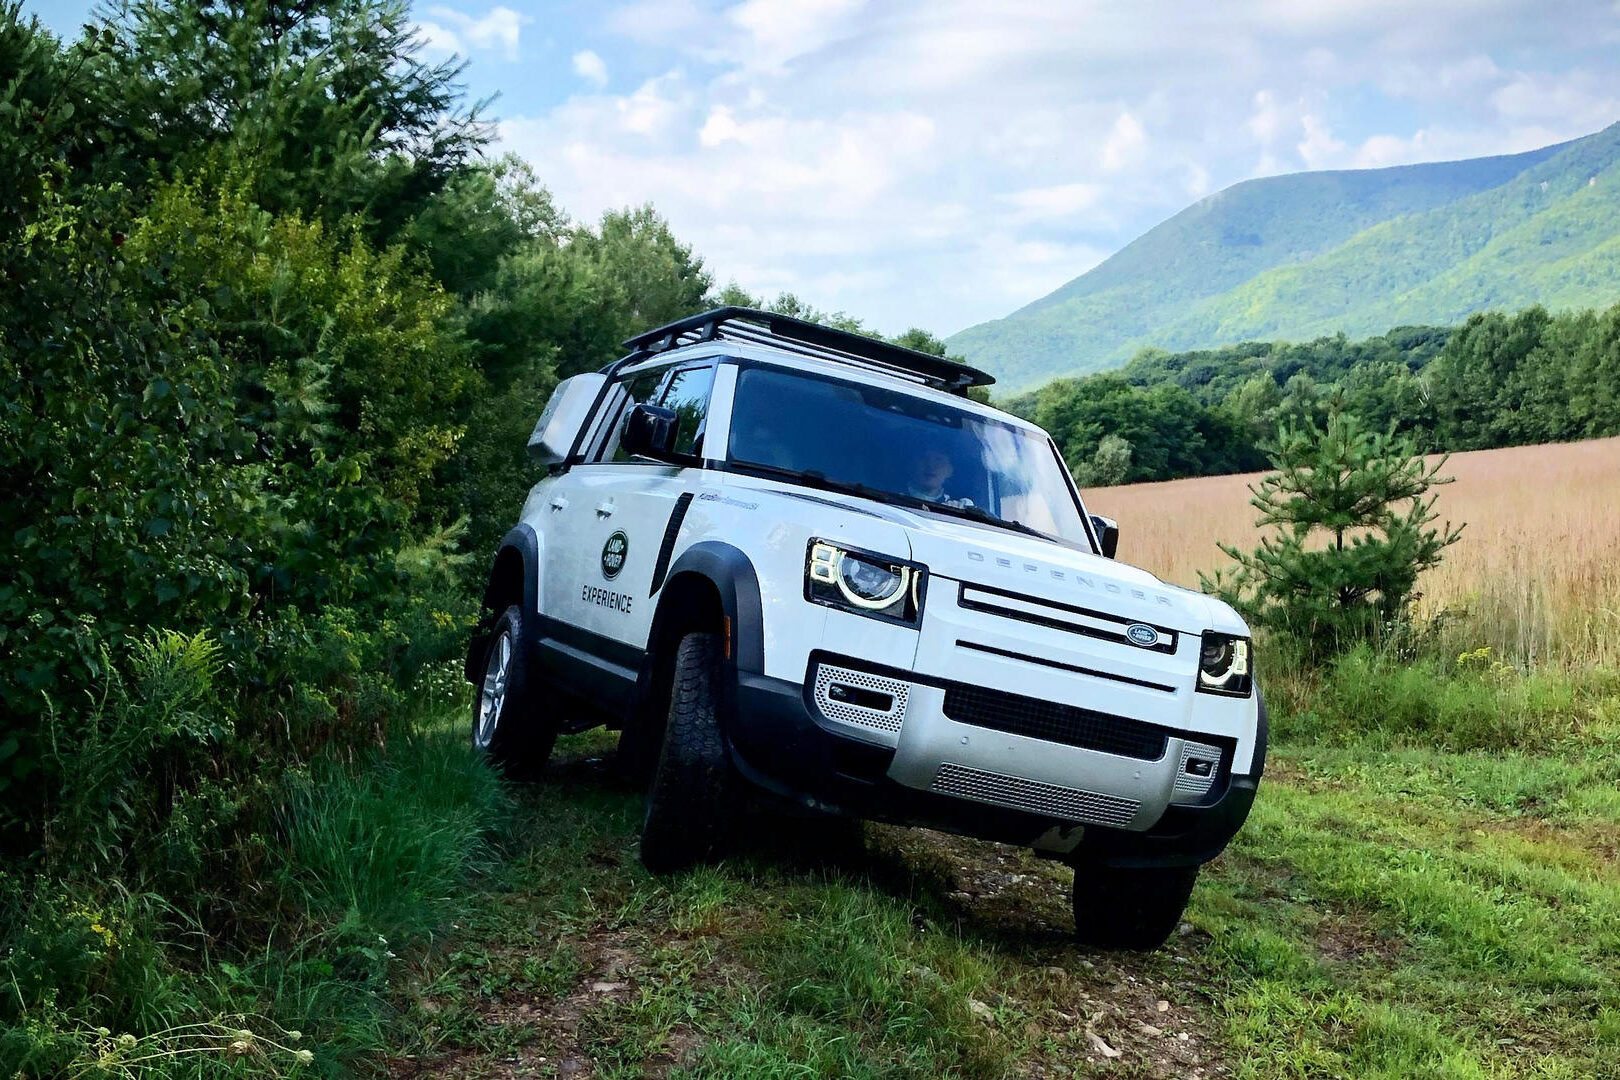 Land Rover driving off road through greenery